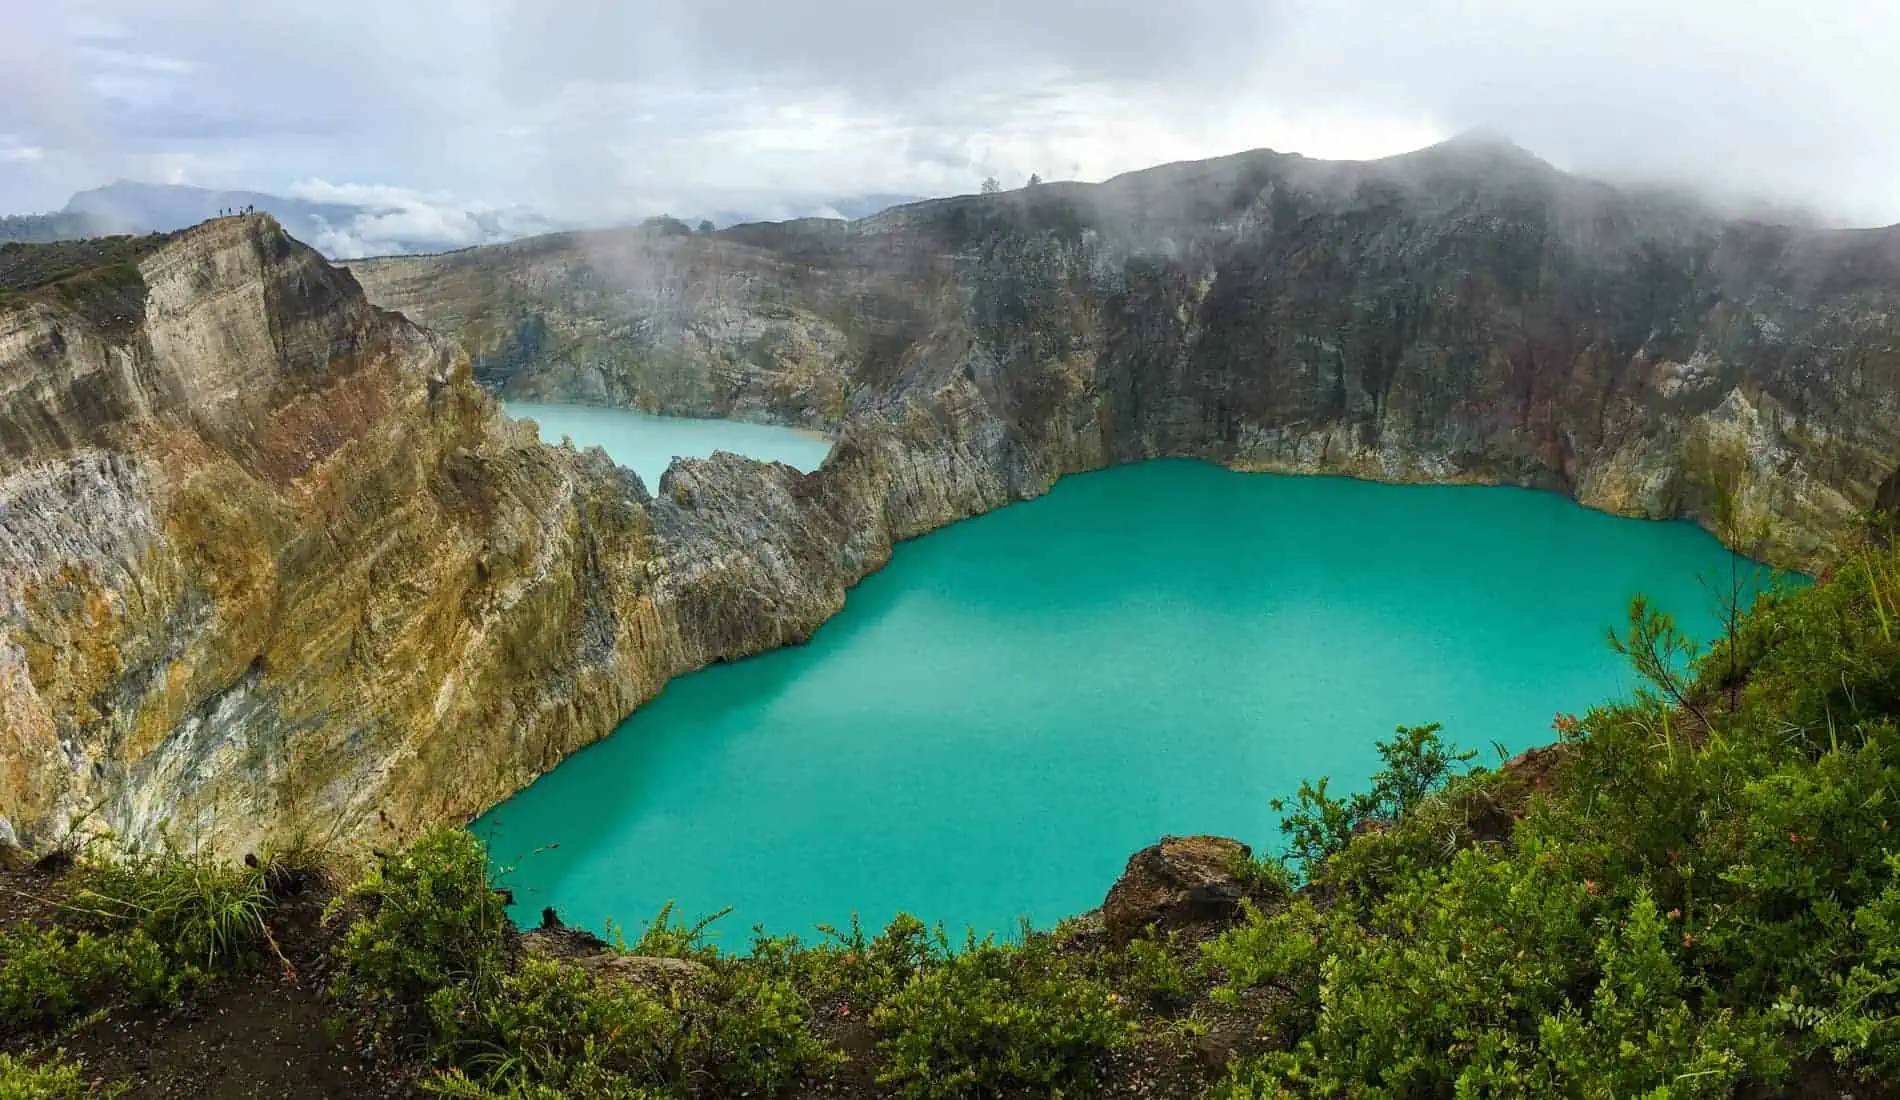 A moody sunrise overlooking Kelimutu’s crater lakes was a huge highlight of our two week Flores itinerary.